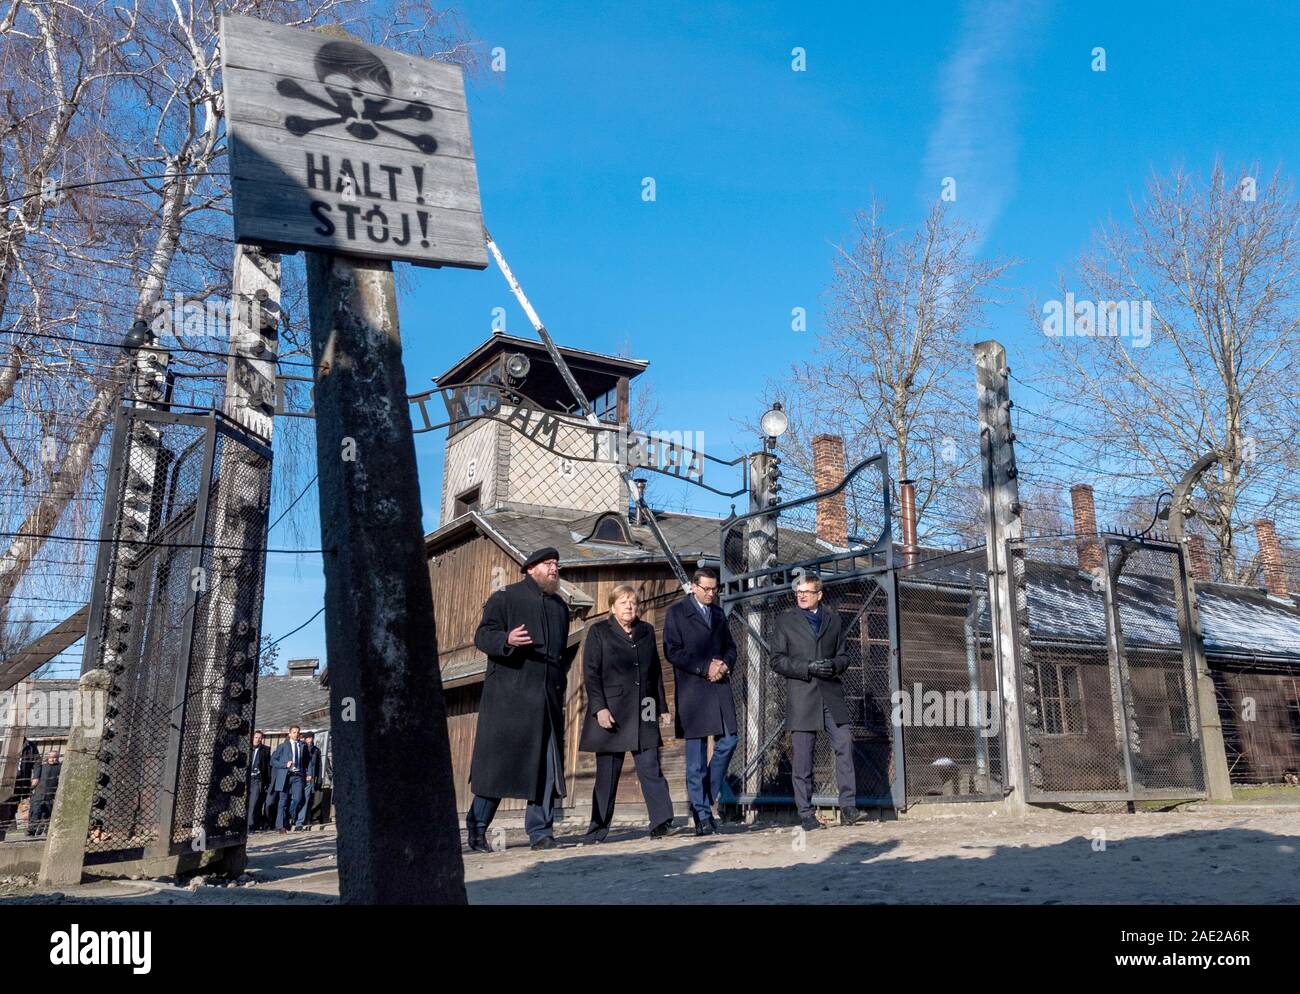 dpatop - 06 December 2019, Poland, Oswiecim: Federal Chancellor Angela Merkel (CDU) visits the former German Auschwitz concentration camp and walks under the entrance gate with the words 'Arbeit macht frei' (Work makes free) together with Polish Prime Minister Mateusz Morawiecki (to the right of Merkel) and Piotr Cywinski (to the left of Merkel), Director of the Auschwitz-Birkenau Memorial and President of the Auschwitz-Birkenau Foundation. Andrzej Kacorzyk, Deputy Director of the Auschwitz-Birkenau Museum, goes to the far right. Merkel accepted an invitation from the Auschwitz-Birkenau Founda Stock Photo